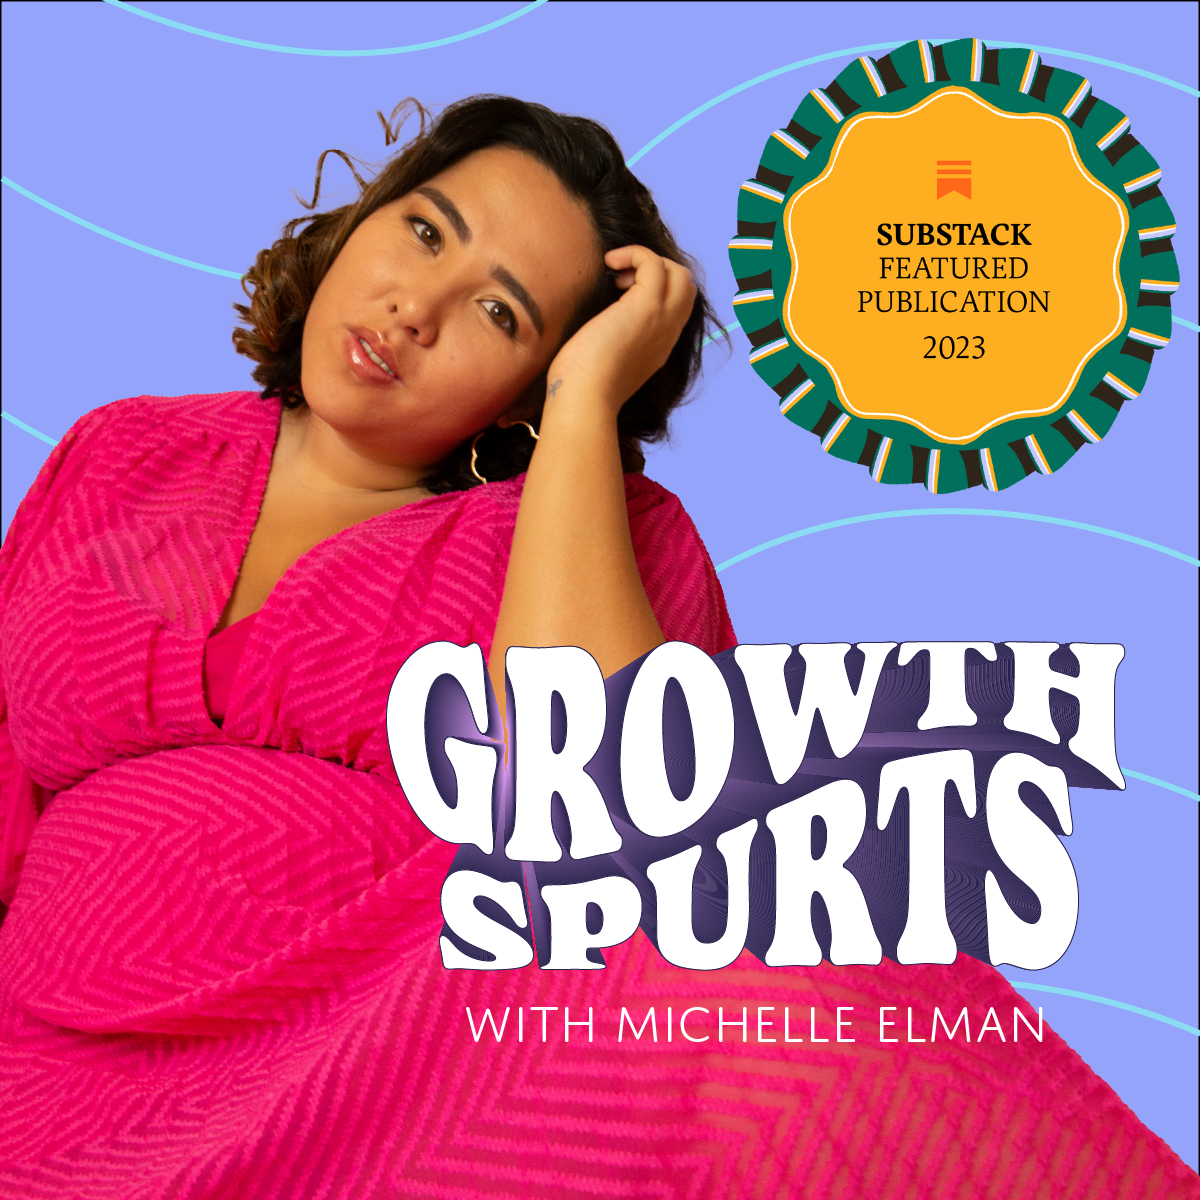 Growth Spurts with Michelle Elman